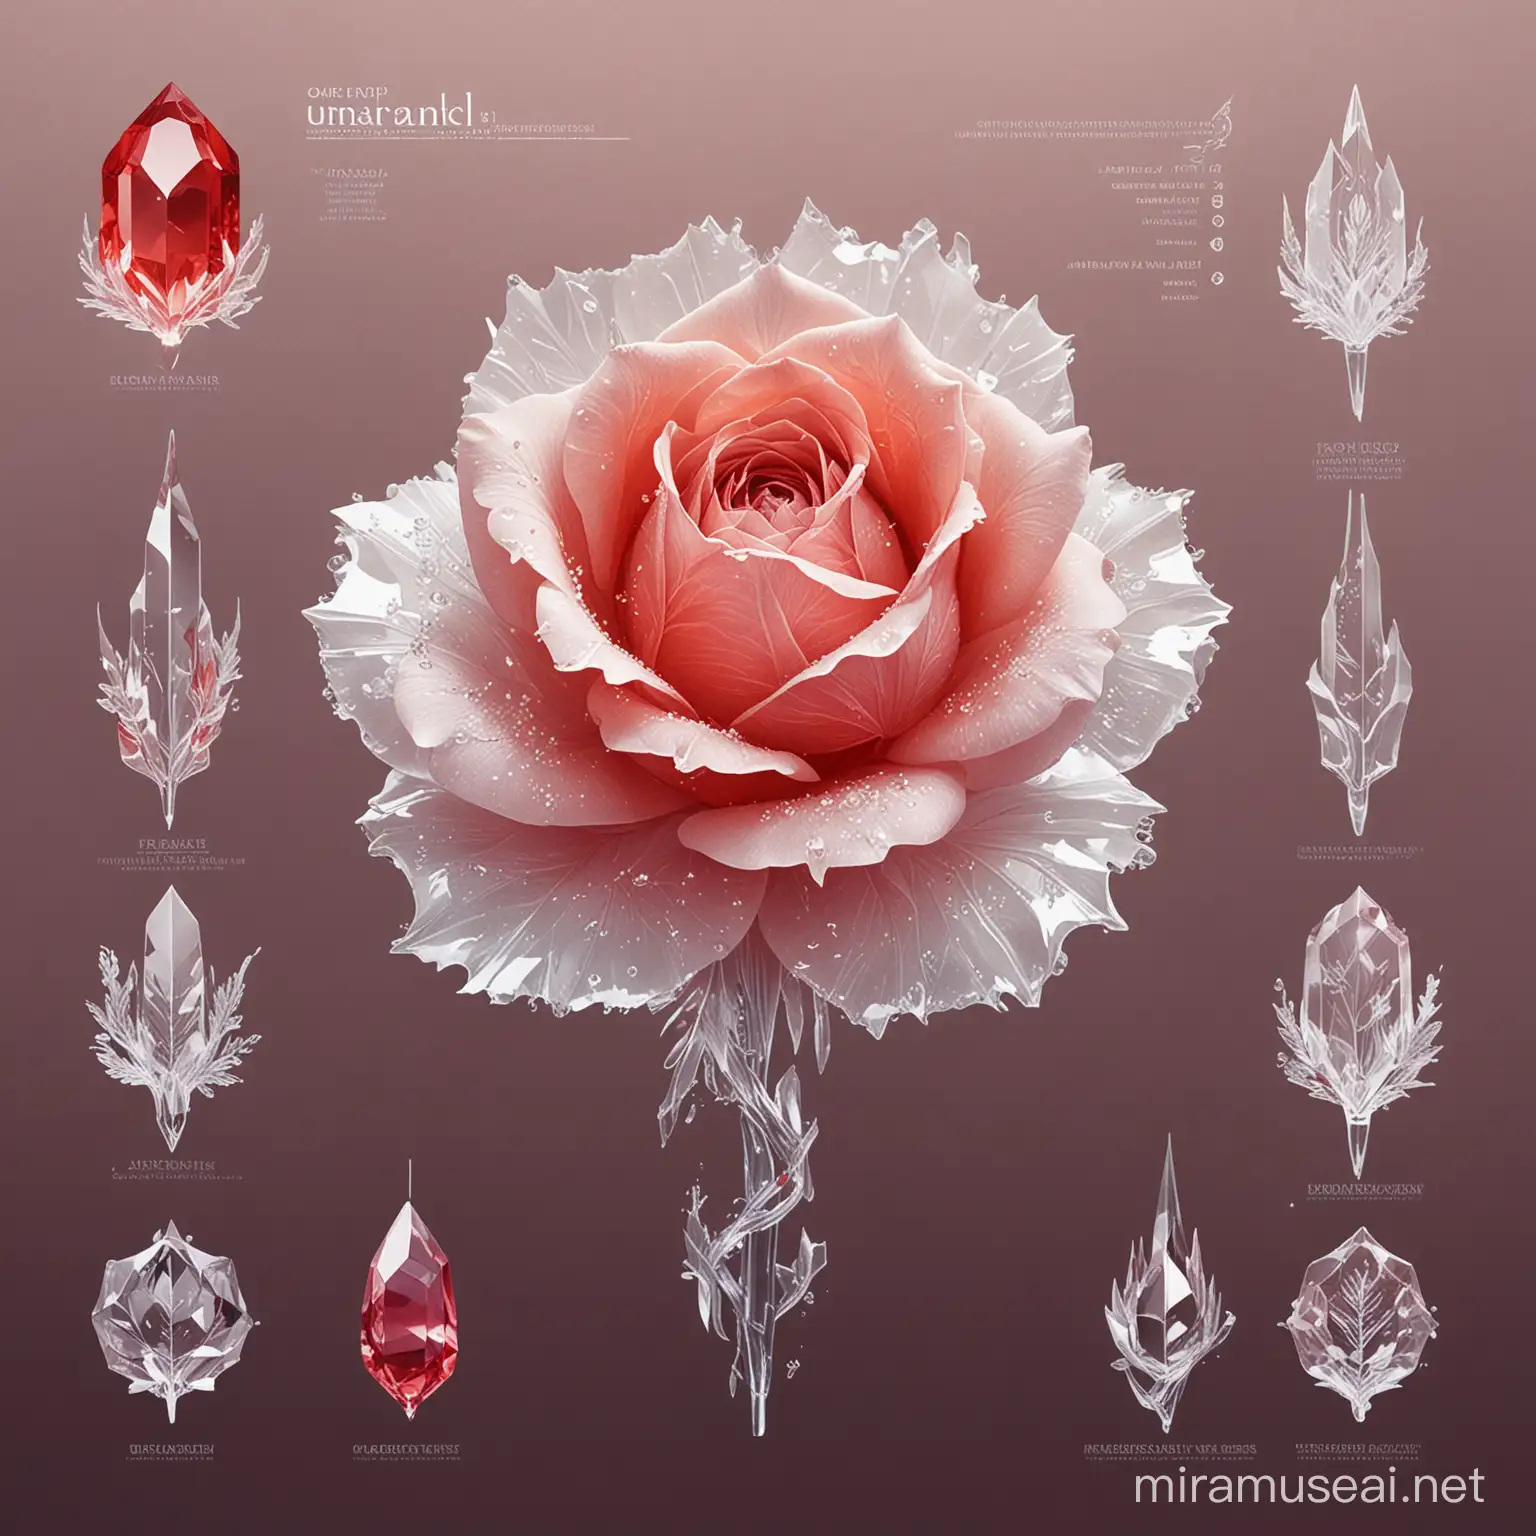 Ethereal Ice Rose Infographic with Futuristic Design